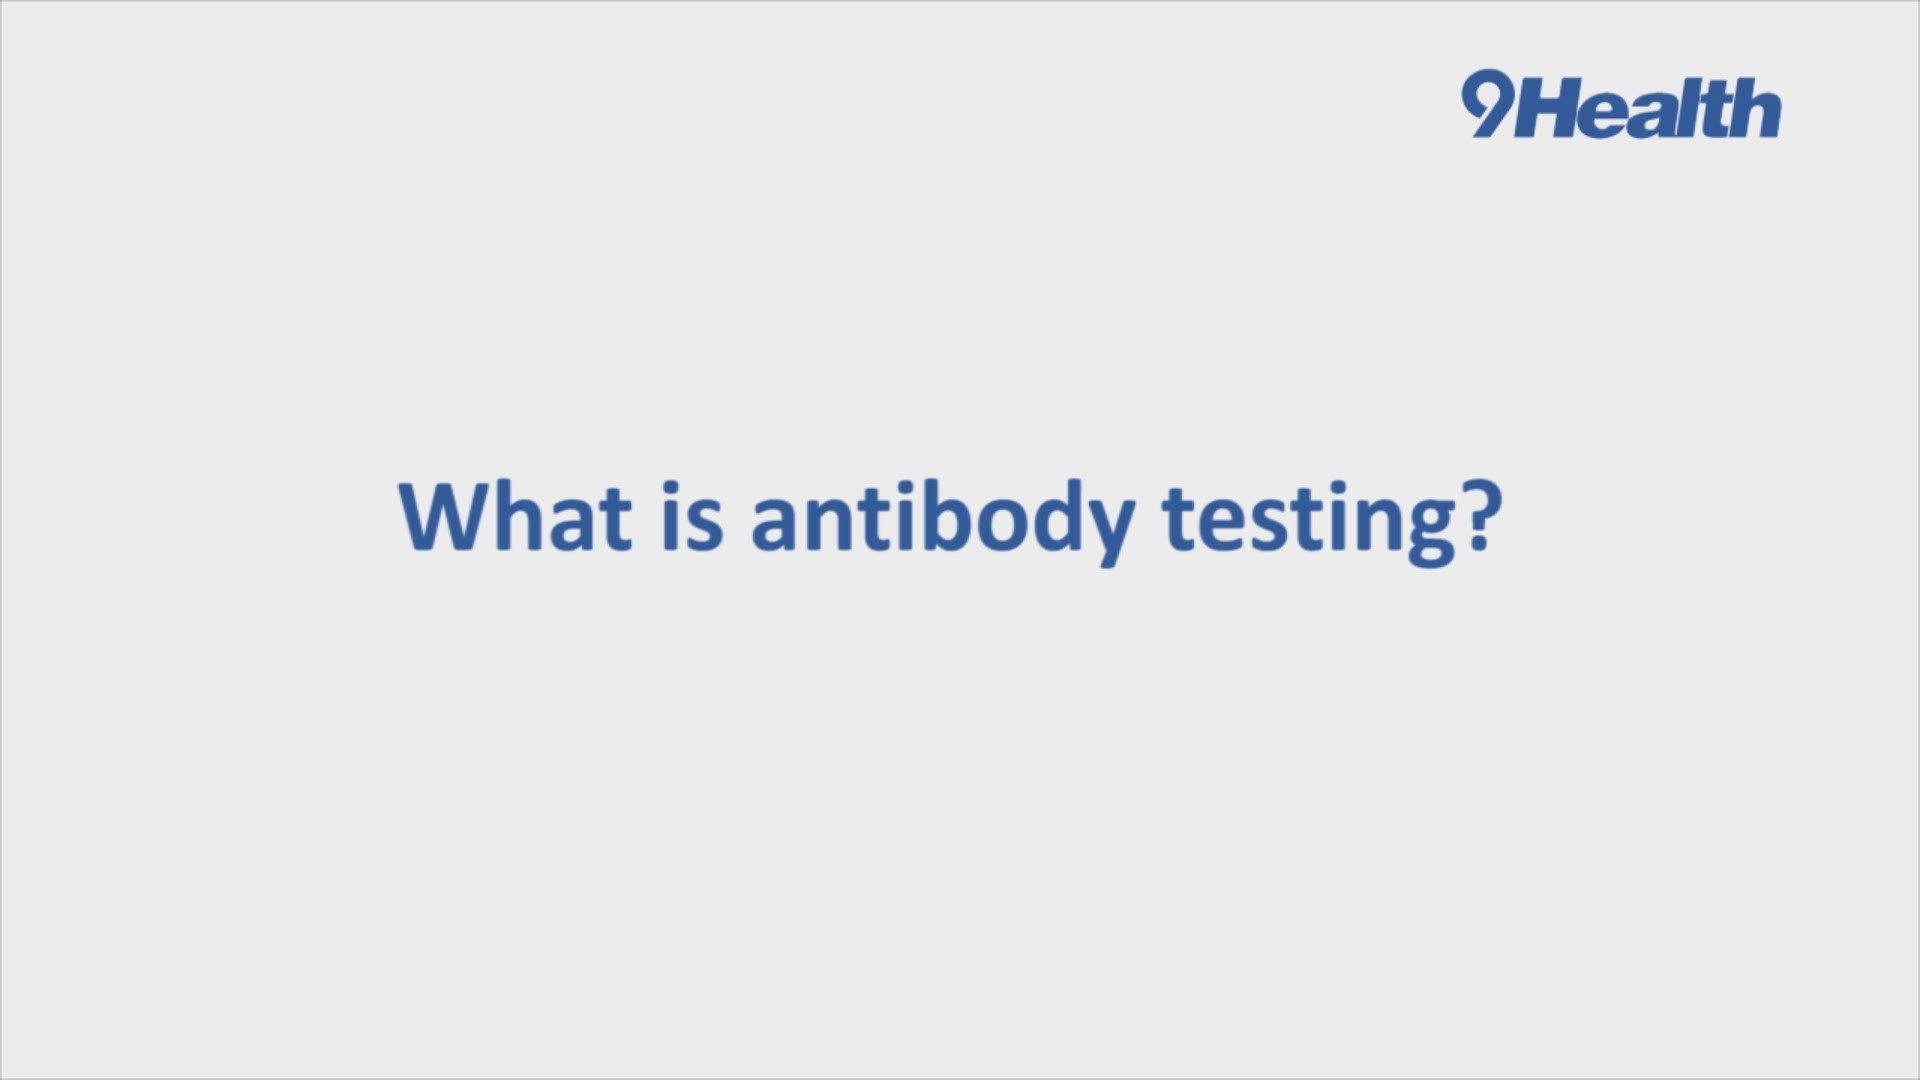 9Health Expert, Dr. Payal Kohli, answers your questions about antibody testing.